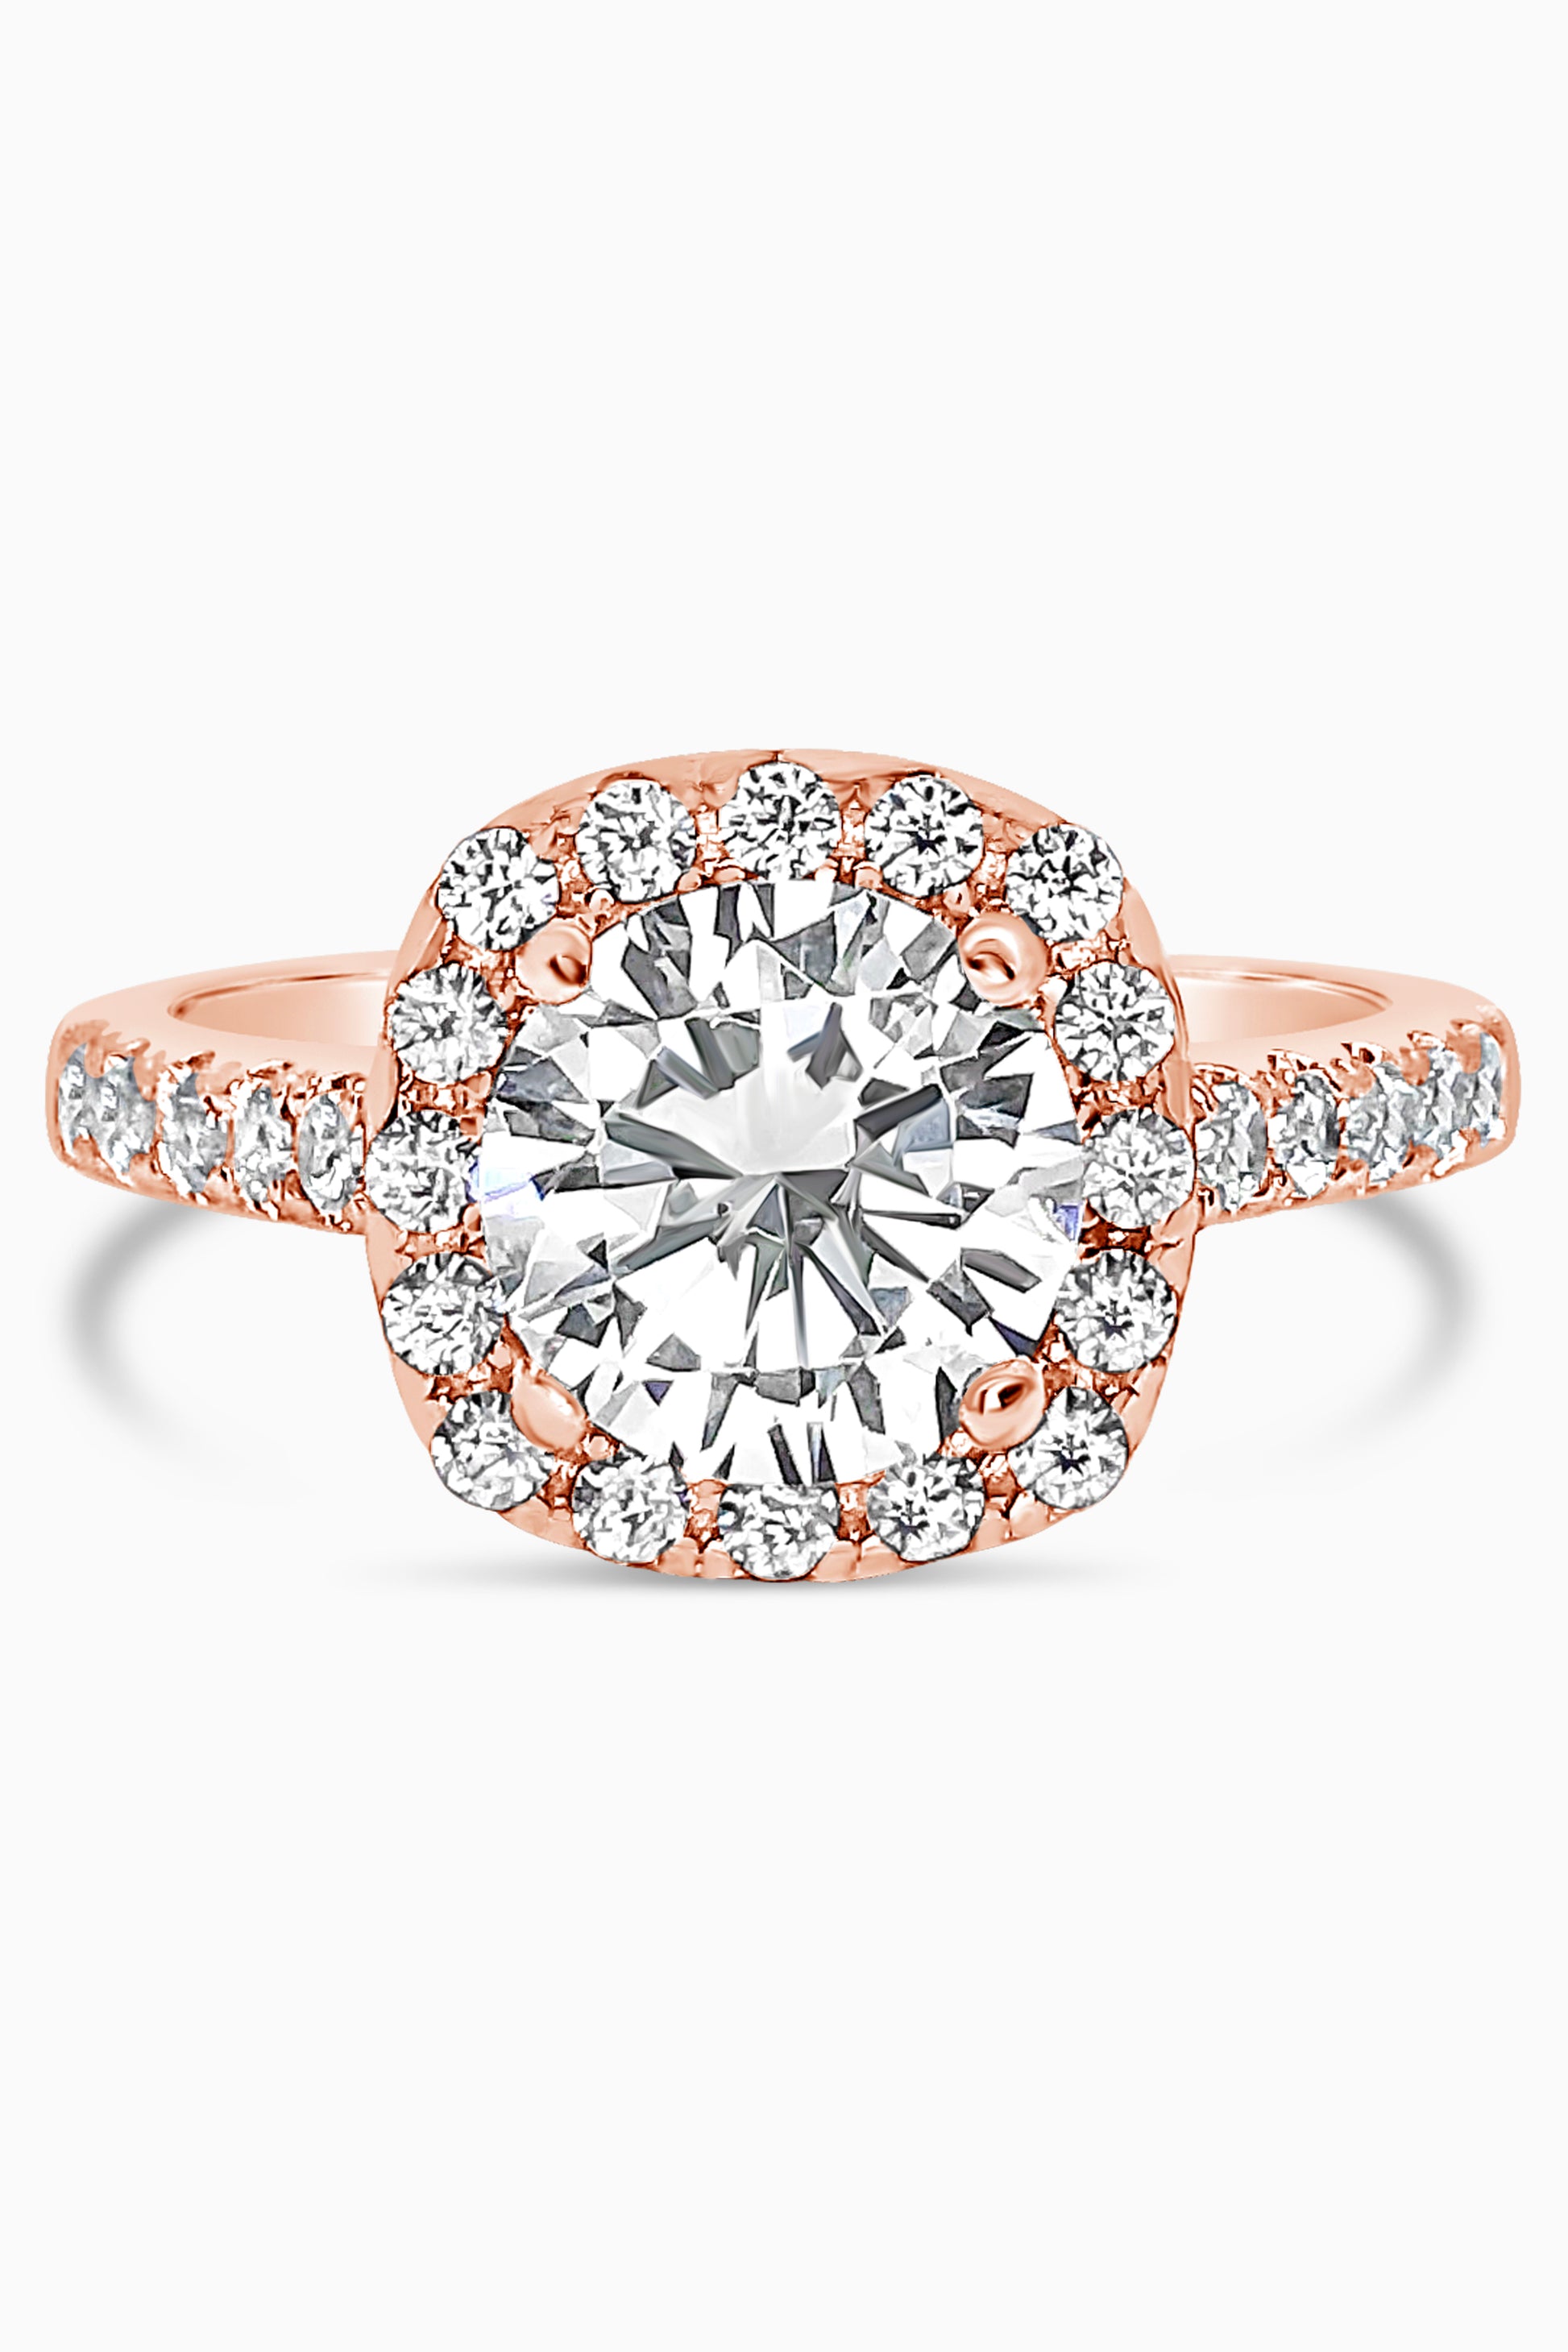 Rose Gold round cut stone surrounded by a Square Halo and Pavé band